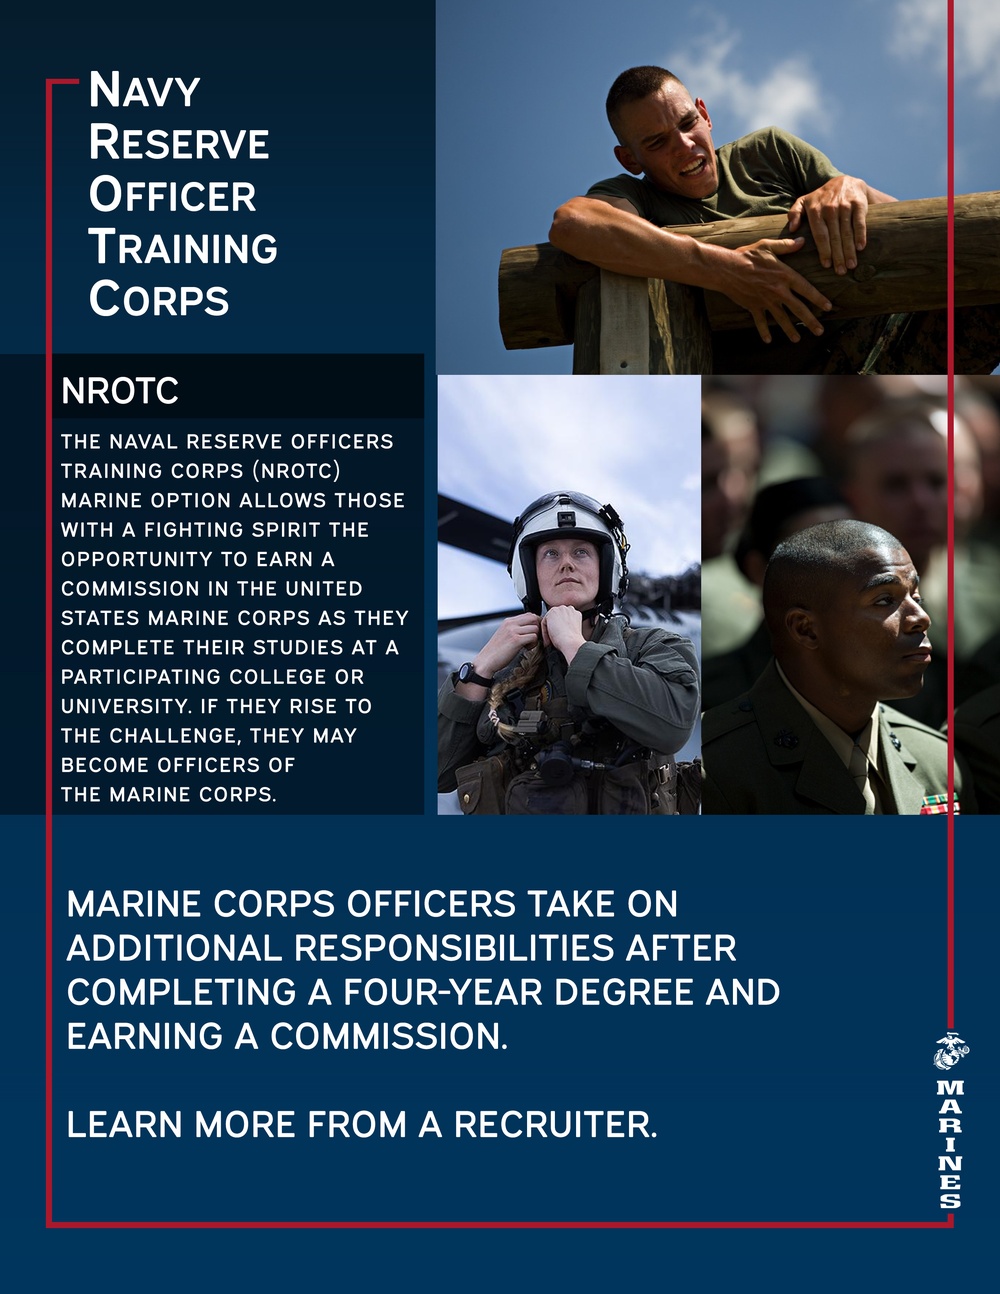 RS Columbia Recruiting Posters: Navy ROTC information